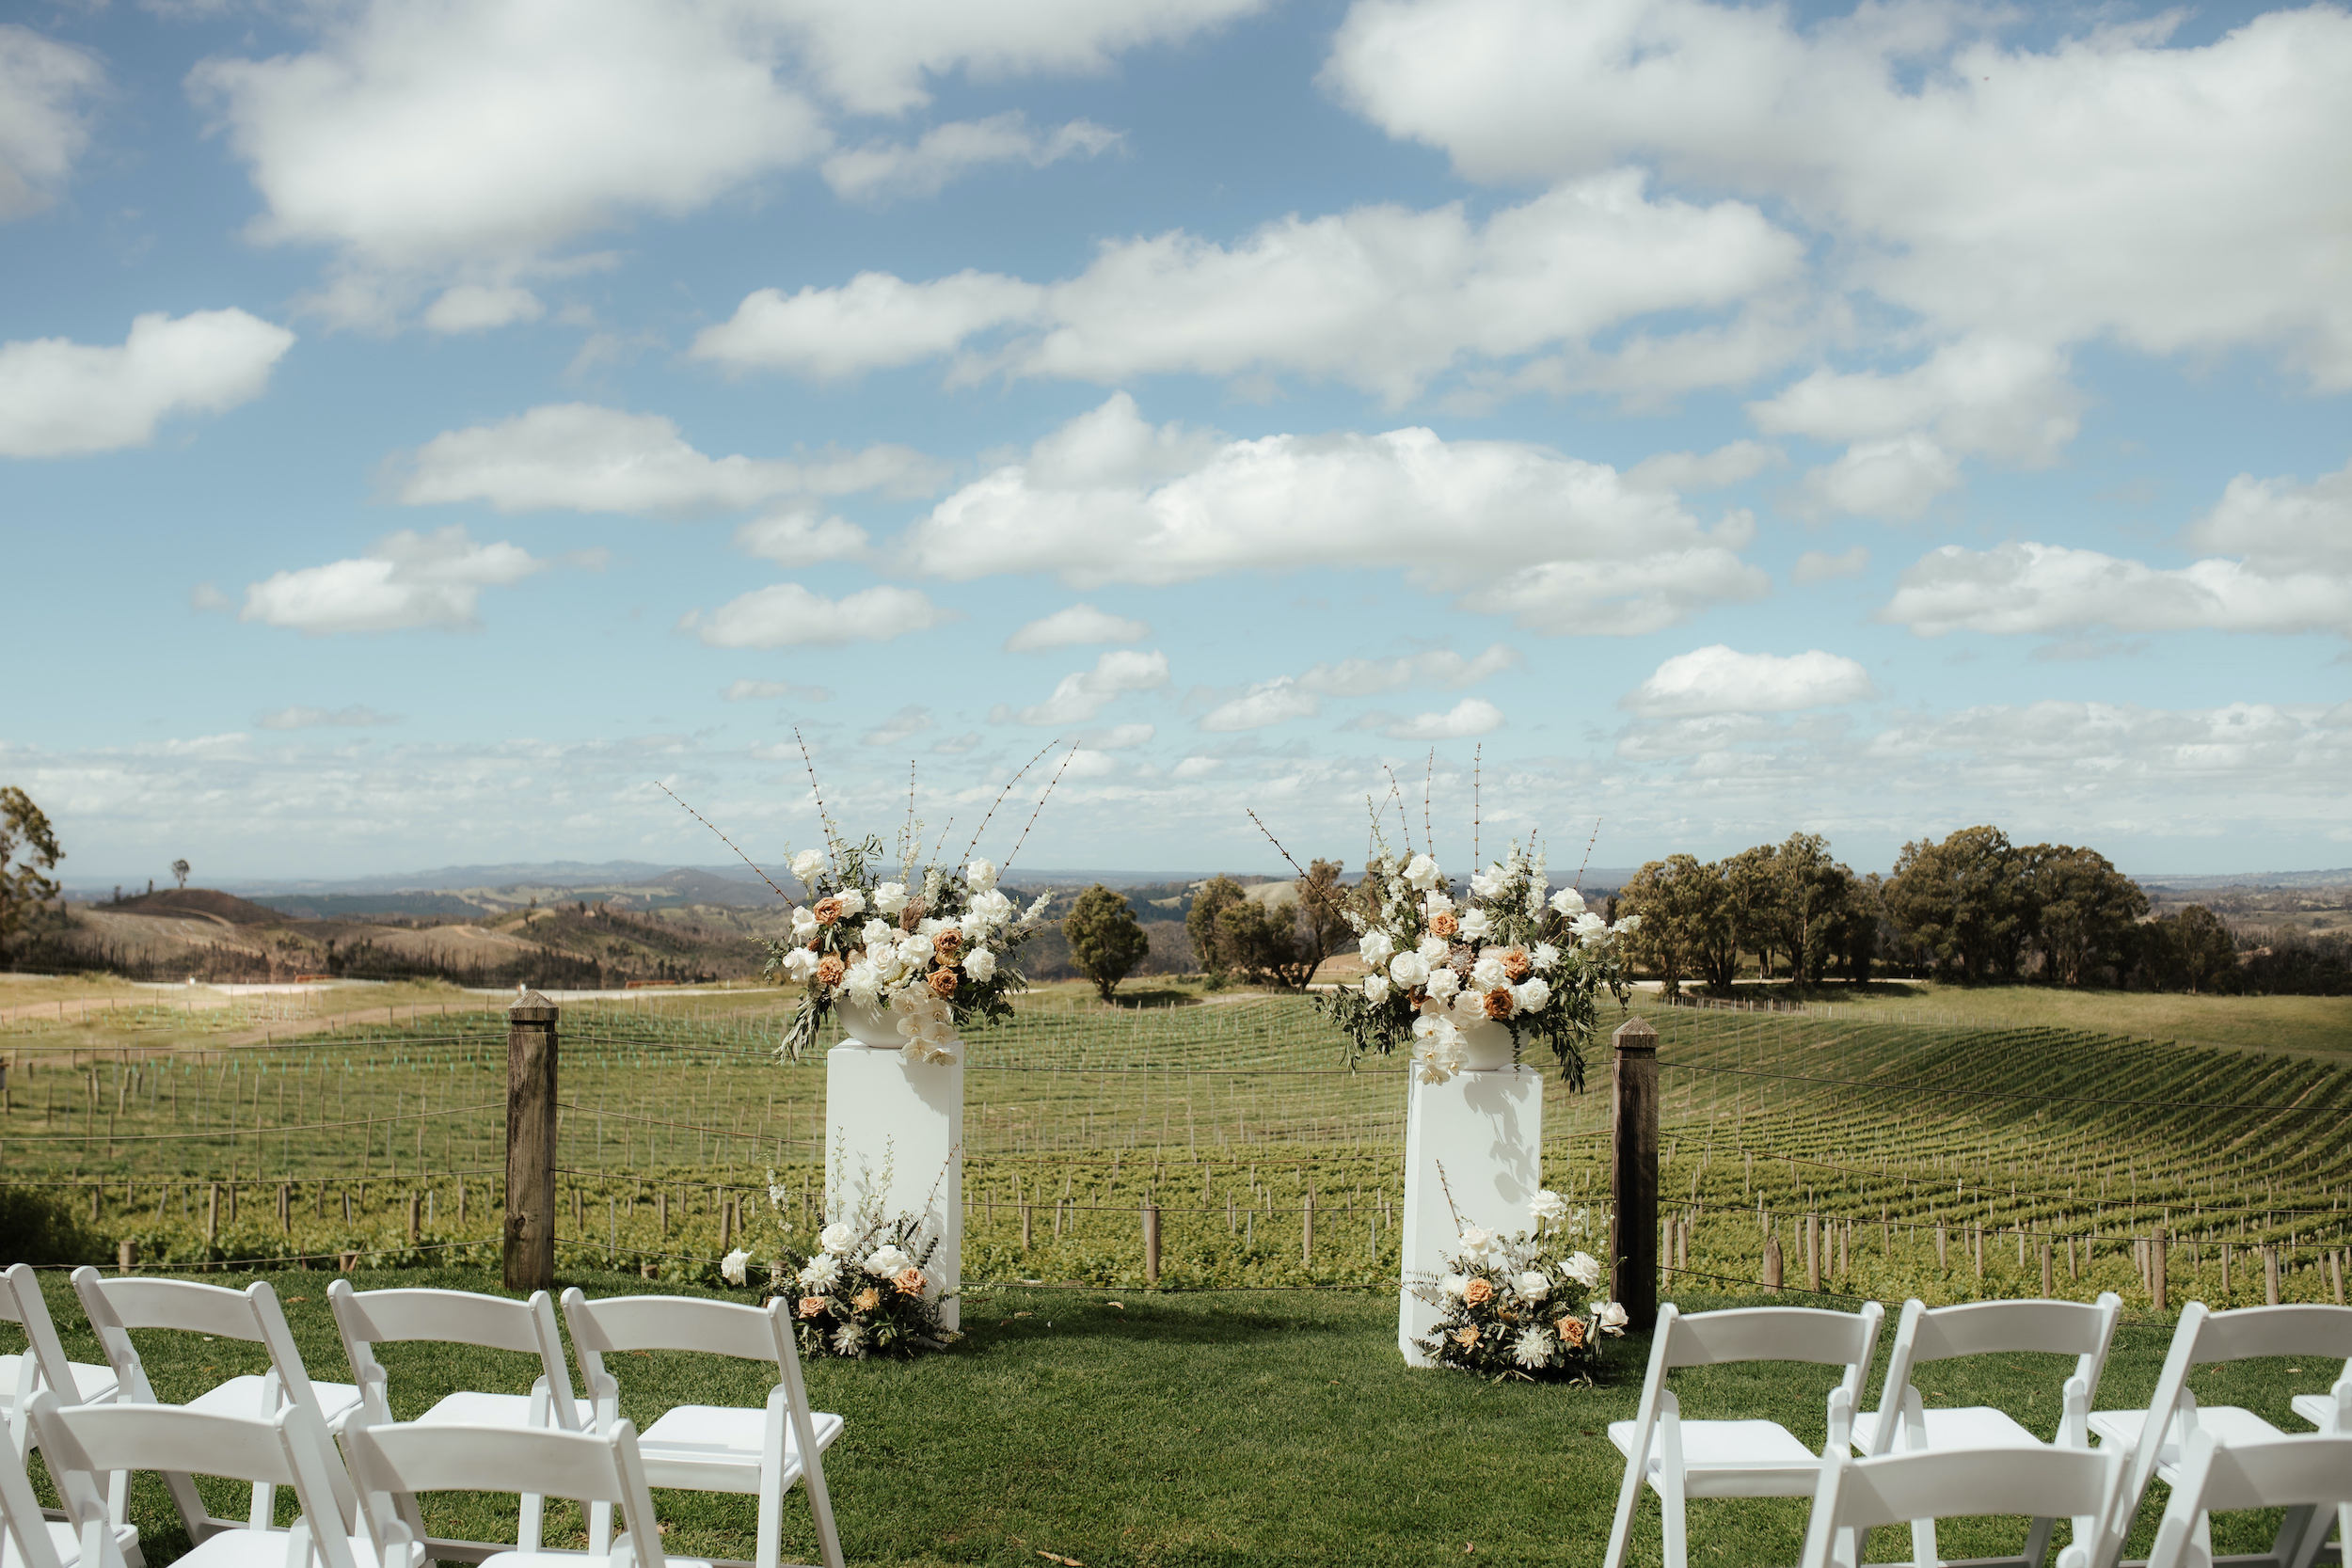 Anderson Hill is a charming and intimate full-service winery venue tucked away amongst the rolling hills and majestic gum trees of the Adelaide Hills.